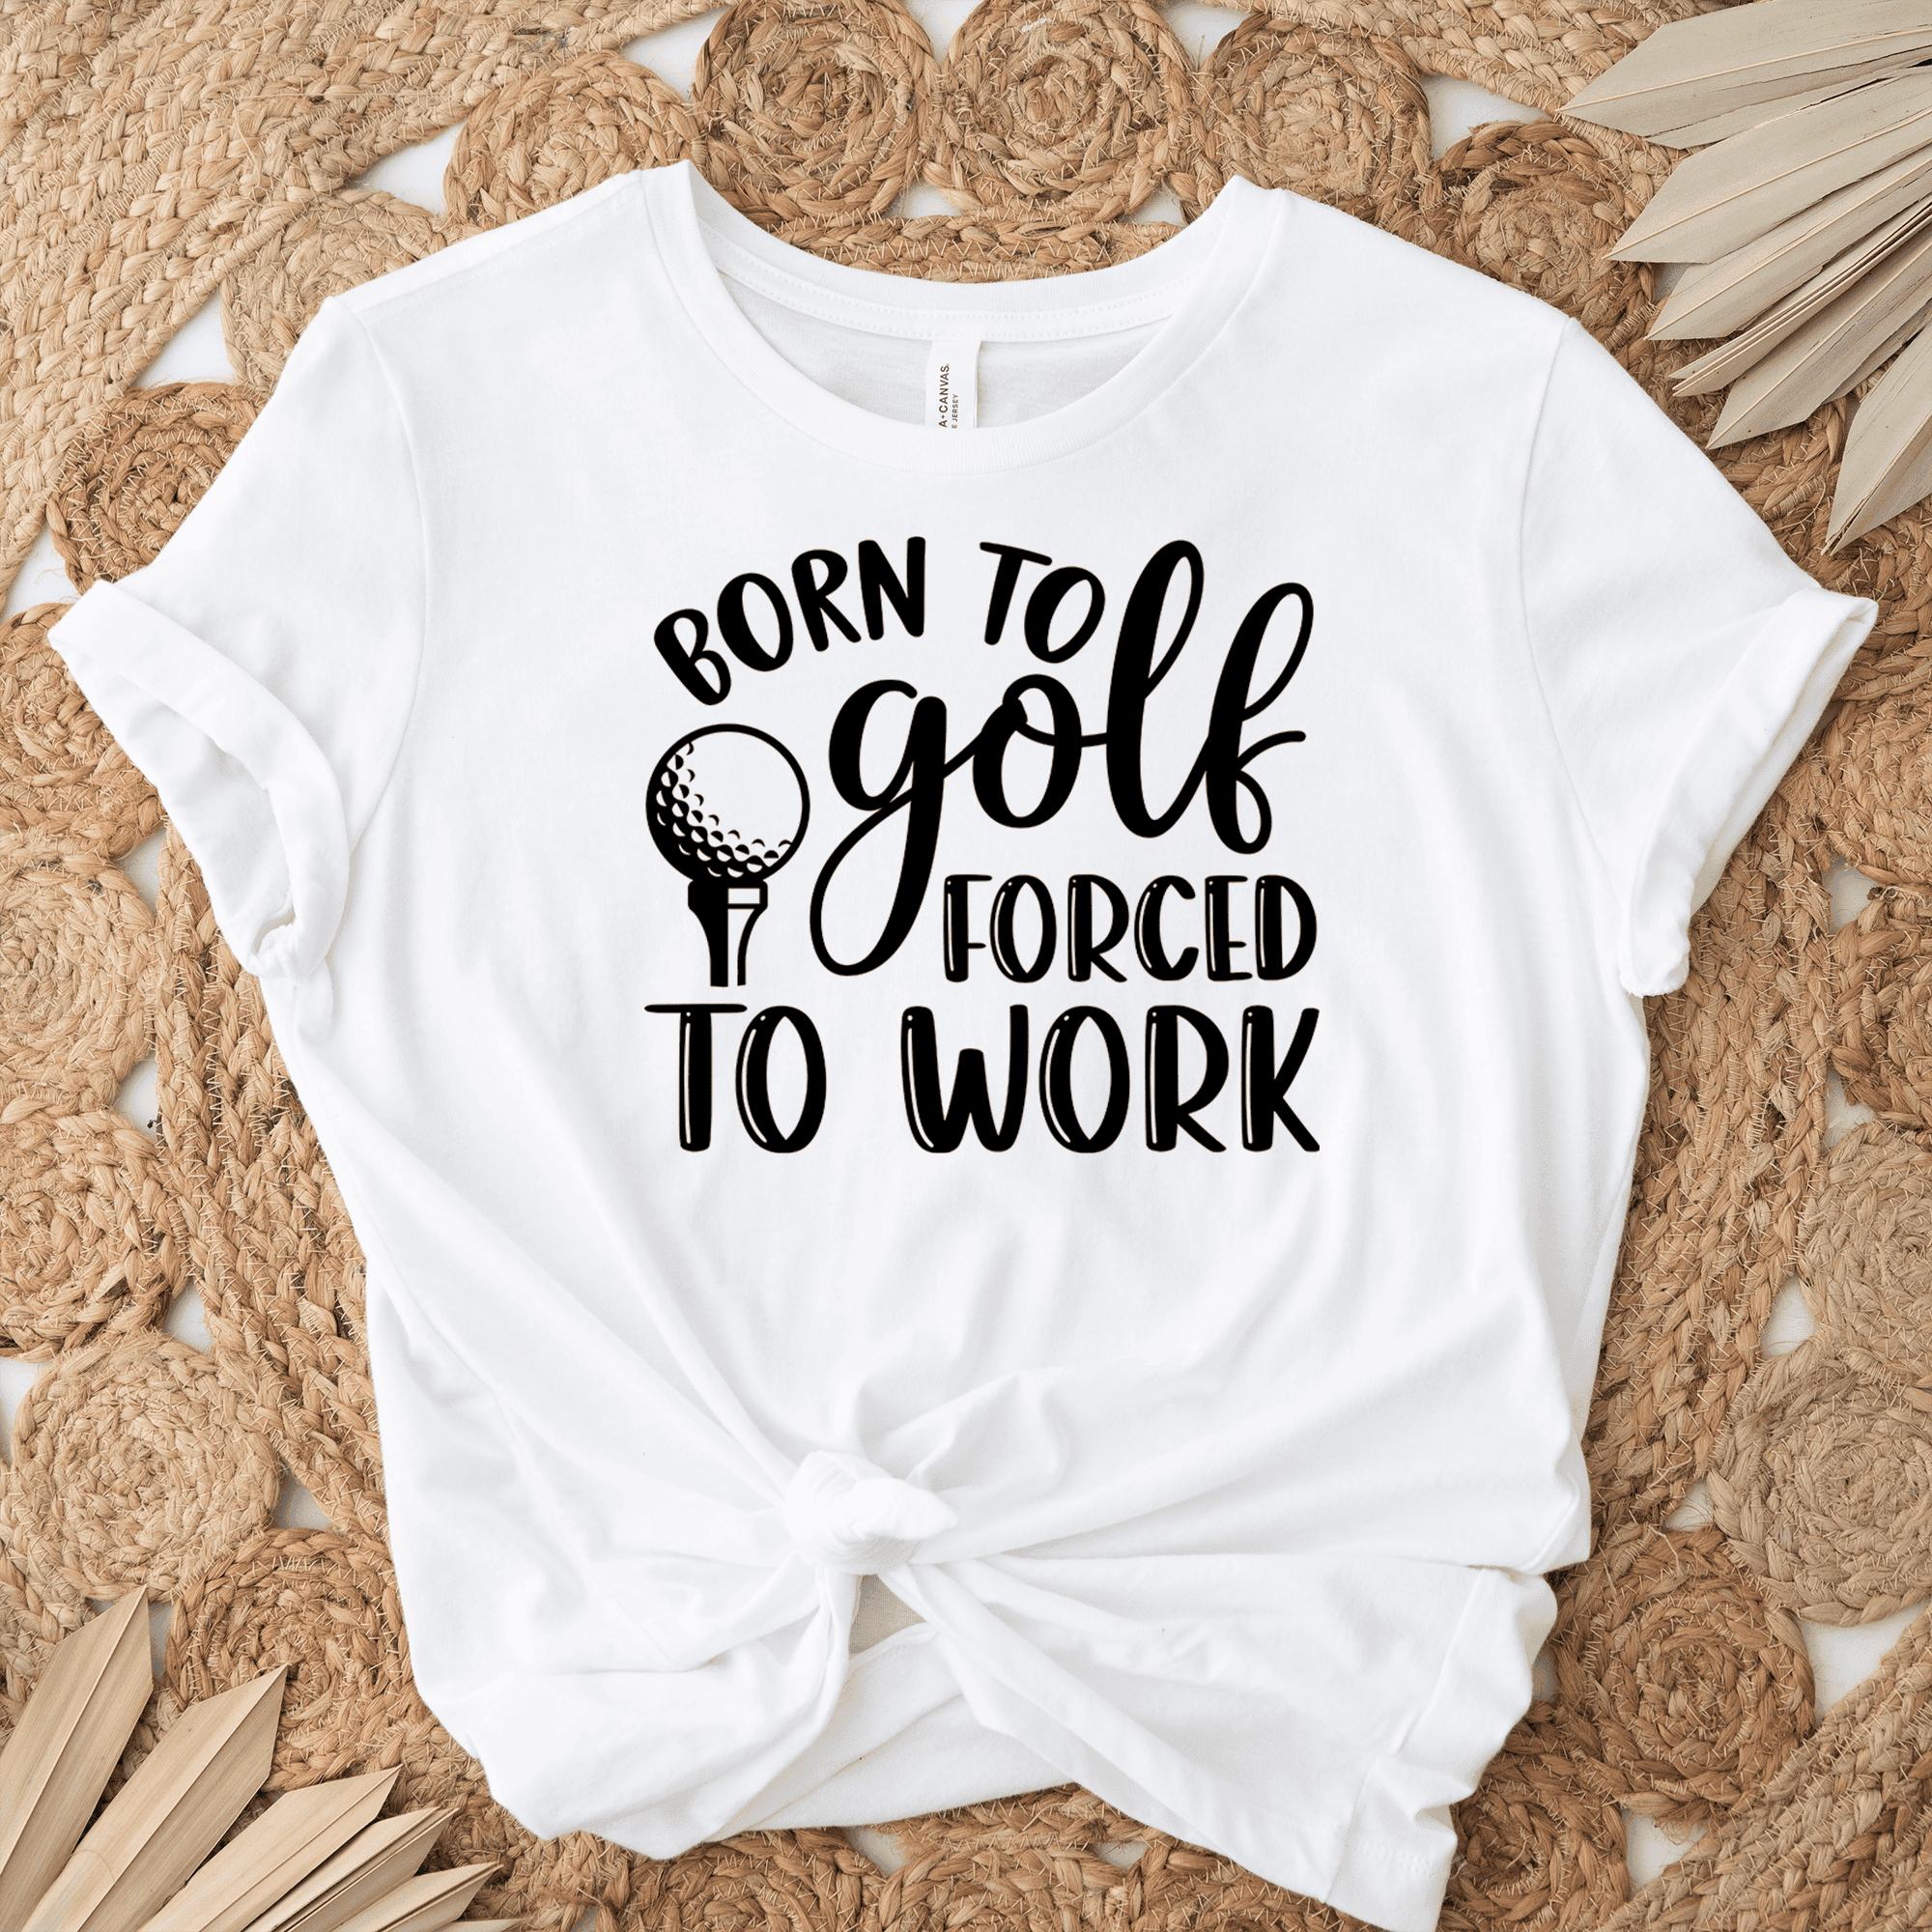 Womens White T Shirt with This-Girls-Born-To-Golf design